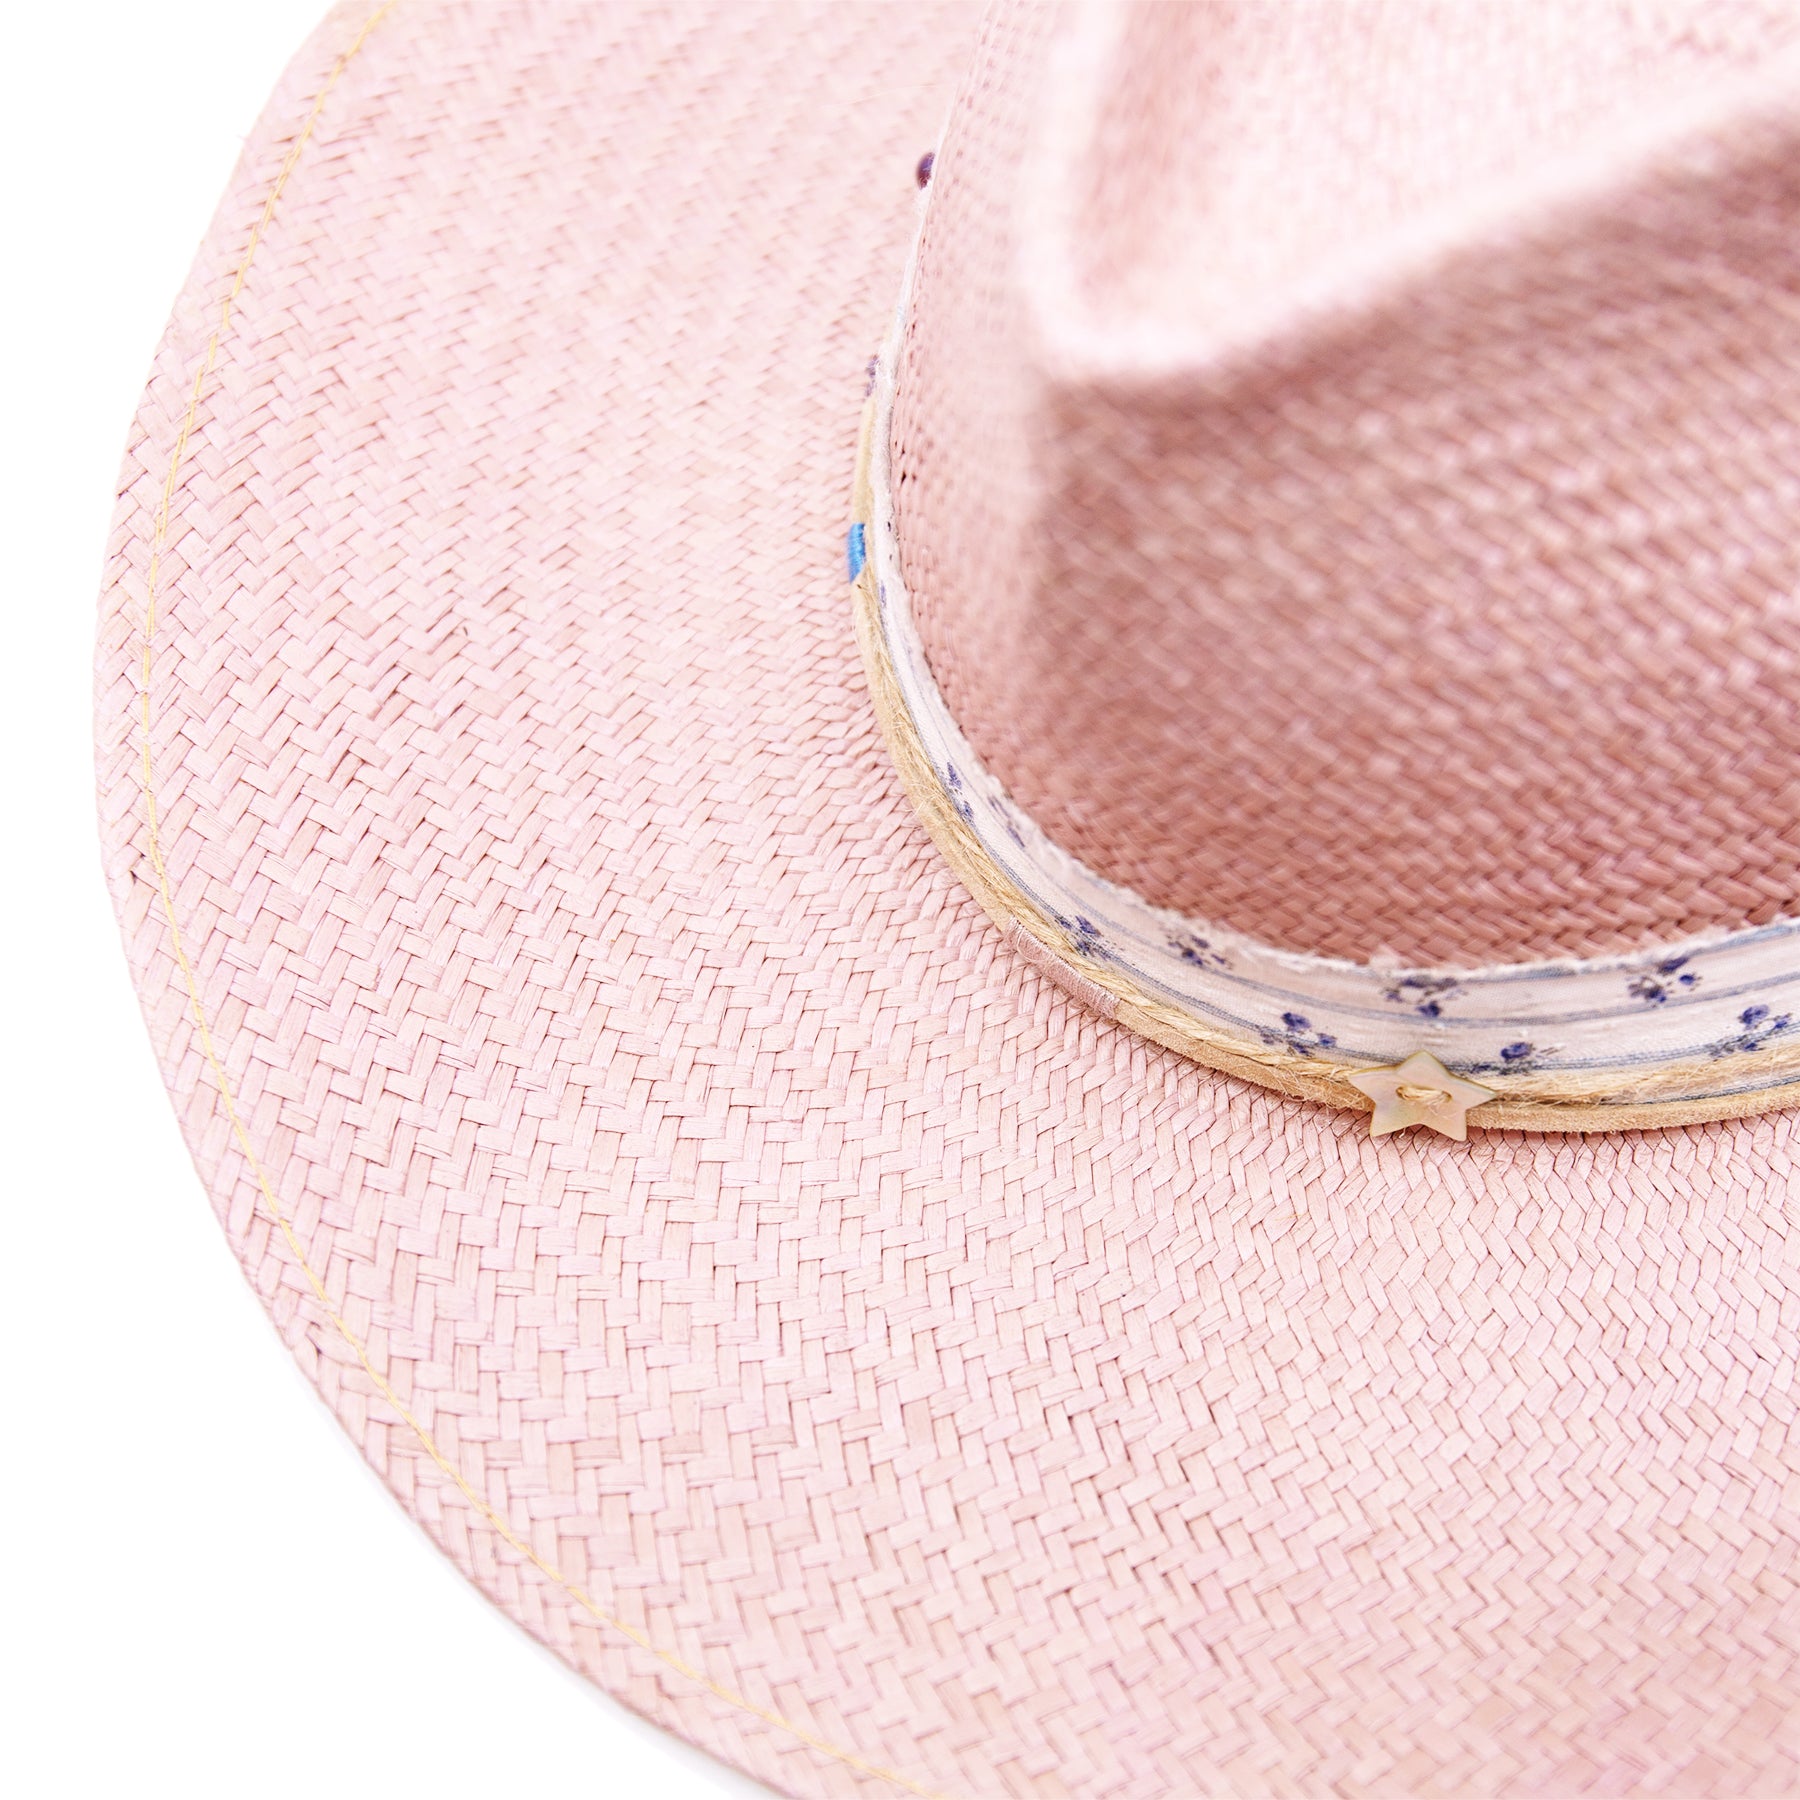 Dandelion Dixie Hwy  100% Ecuadorian straw in Blush  1” deadstock striped fabric band and bow  Nude leather band and twine with accouterments and color accents  Molt-harvested parrot feather  Custom NF jewelry piece on crown  Woven in Ecuador  Subtle western flanged brim  Made in USA